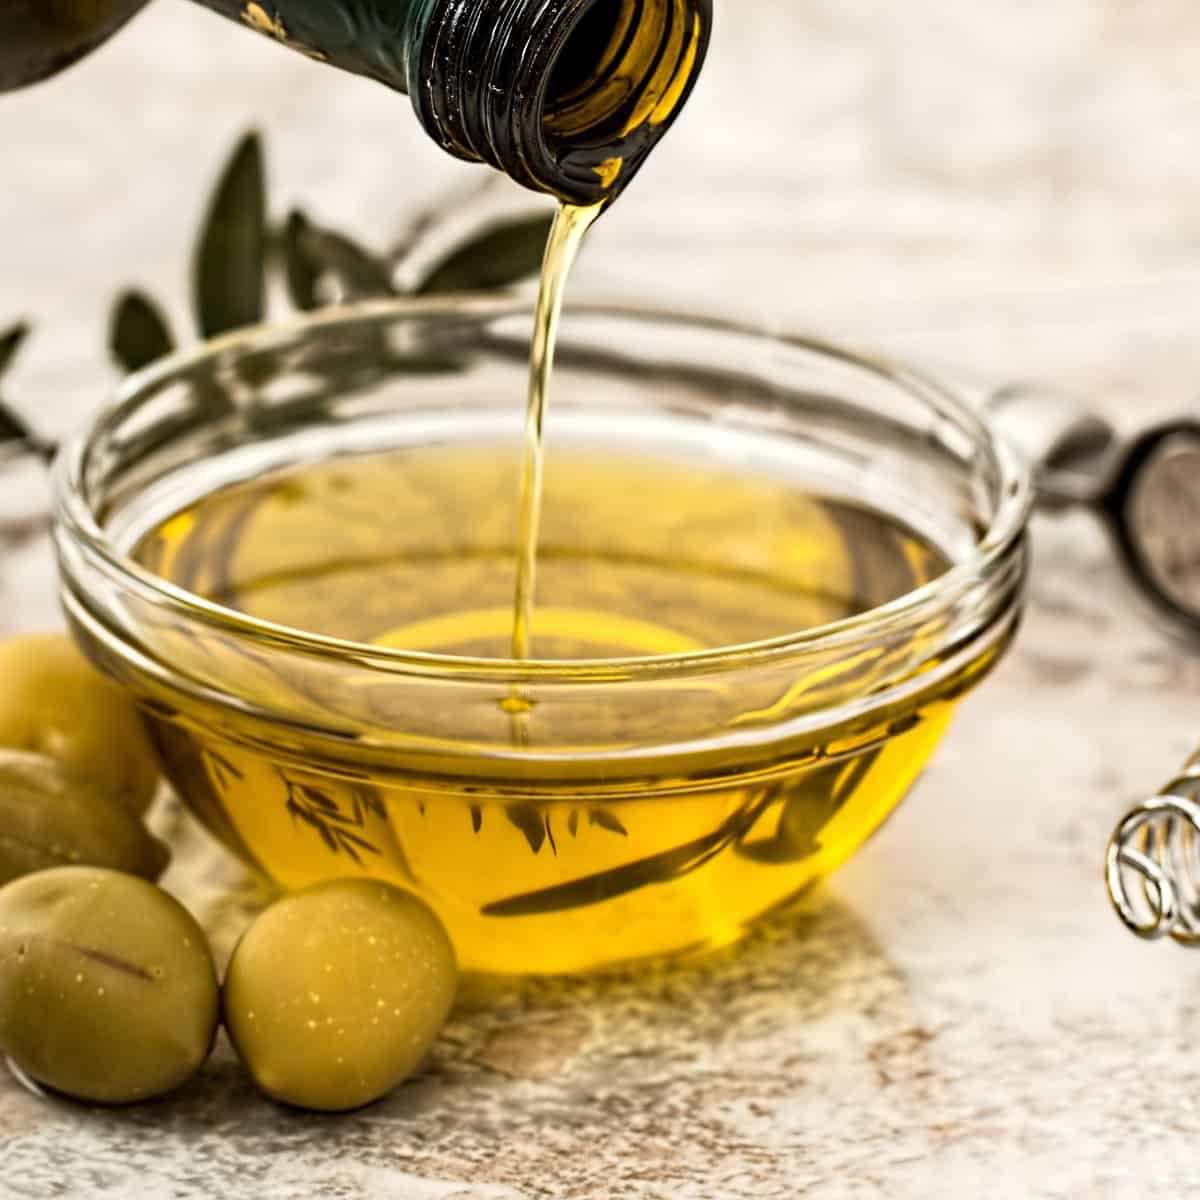 What is olive oil